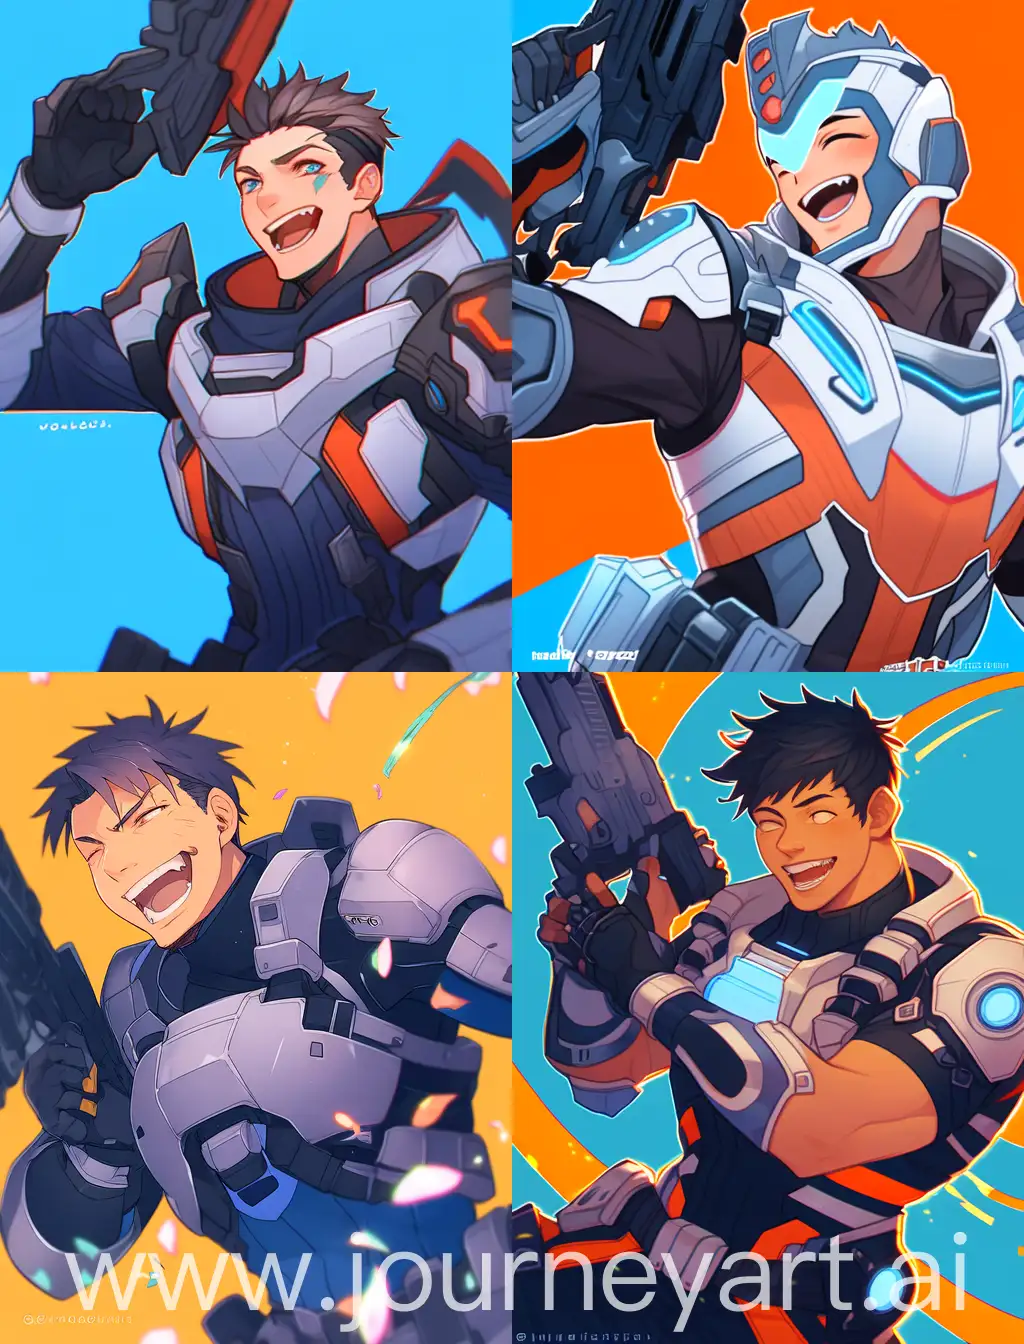 Futuristic-Anime-Character-Laughing-with-Gun-in-Hand-Against-Blue-and-Orange-Background